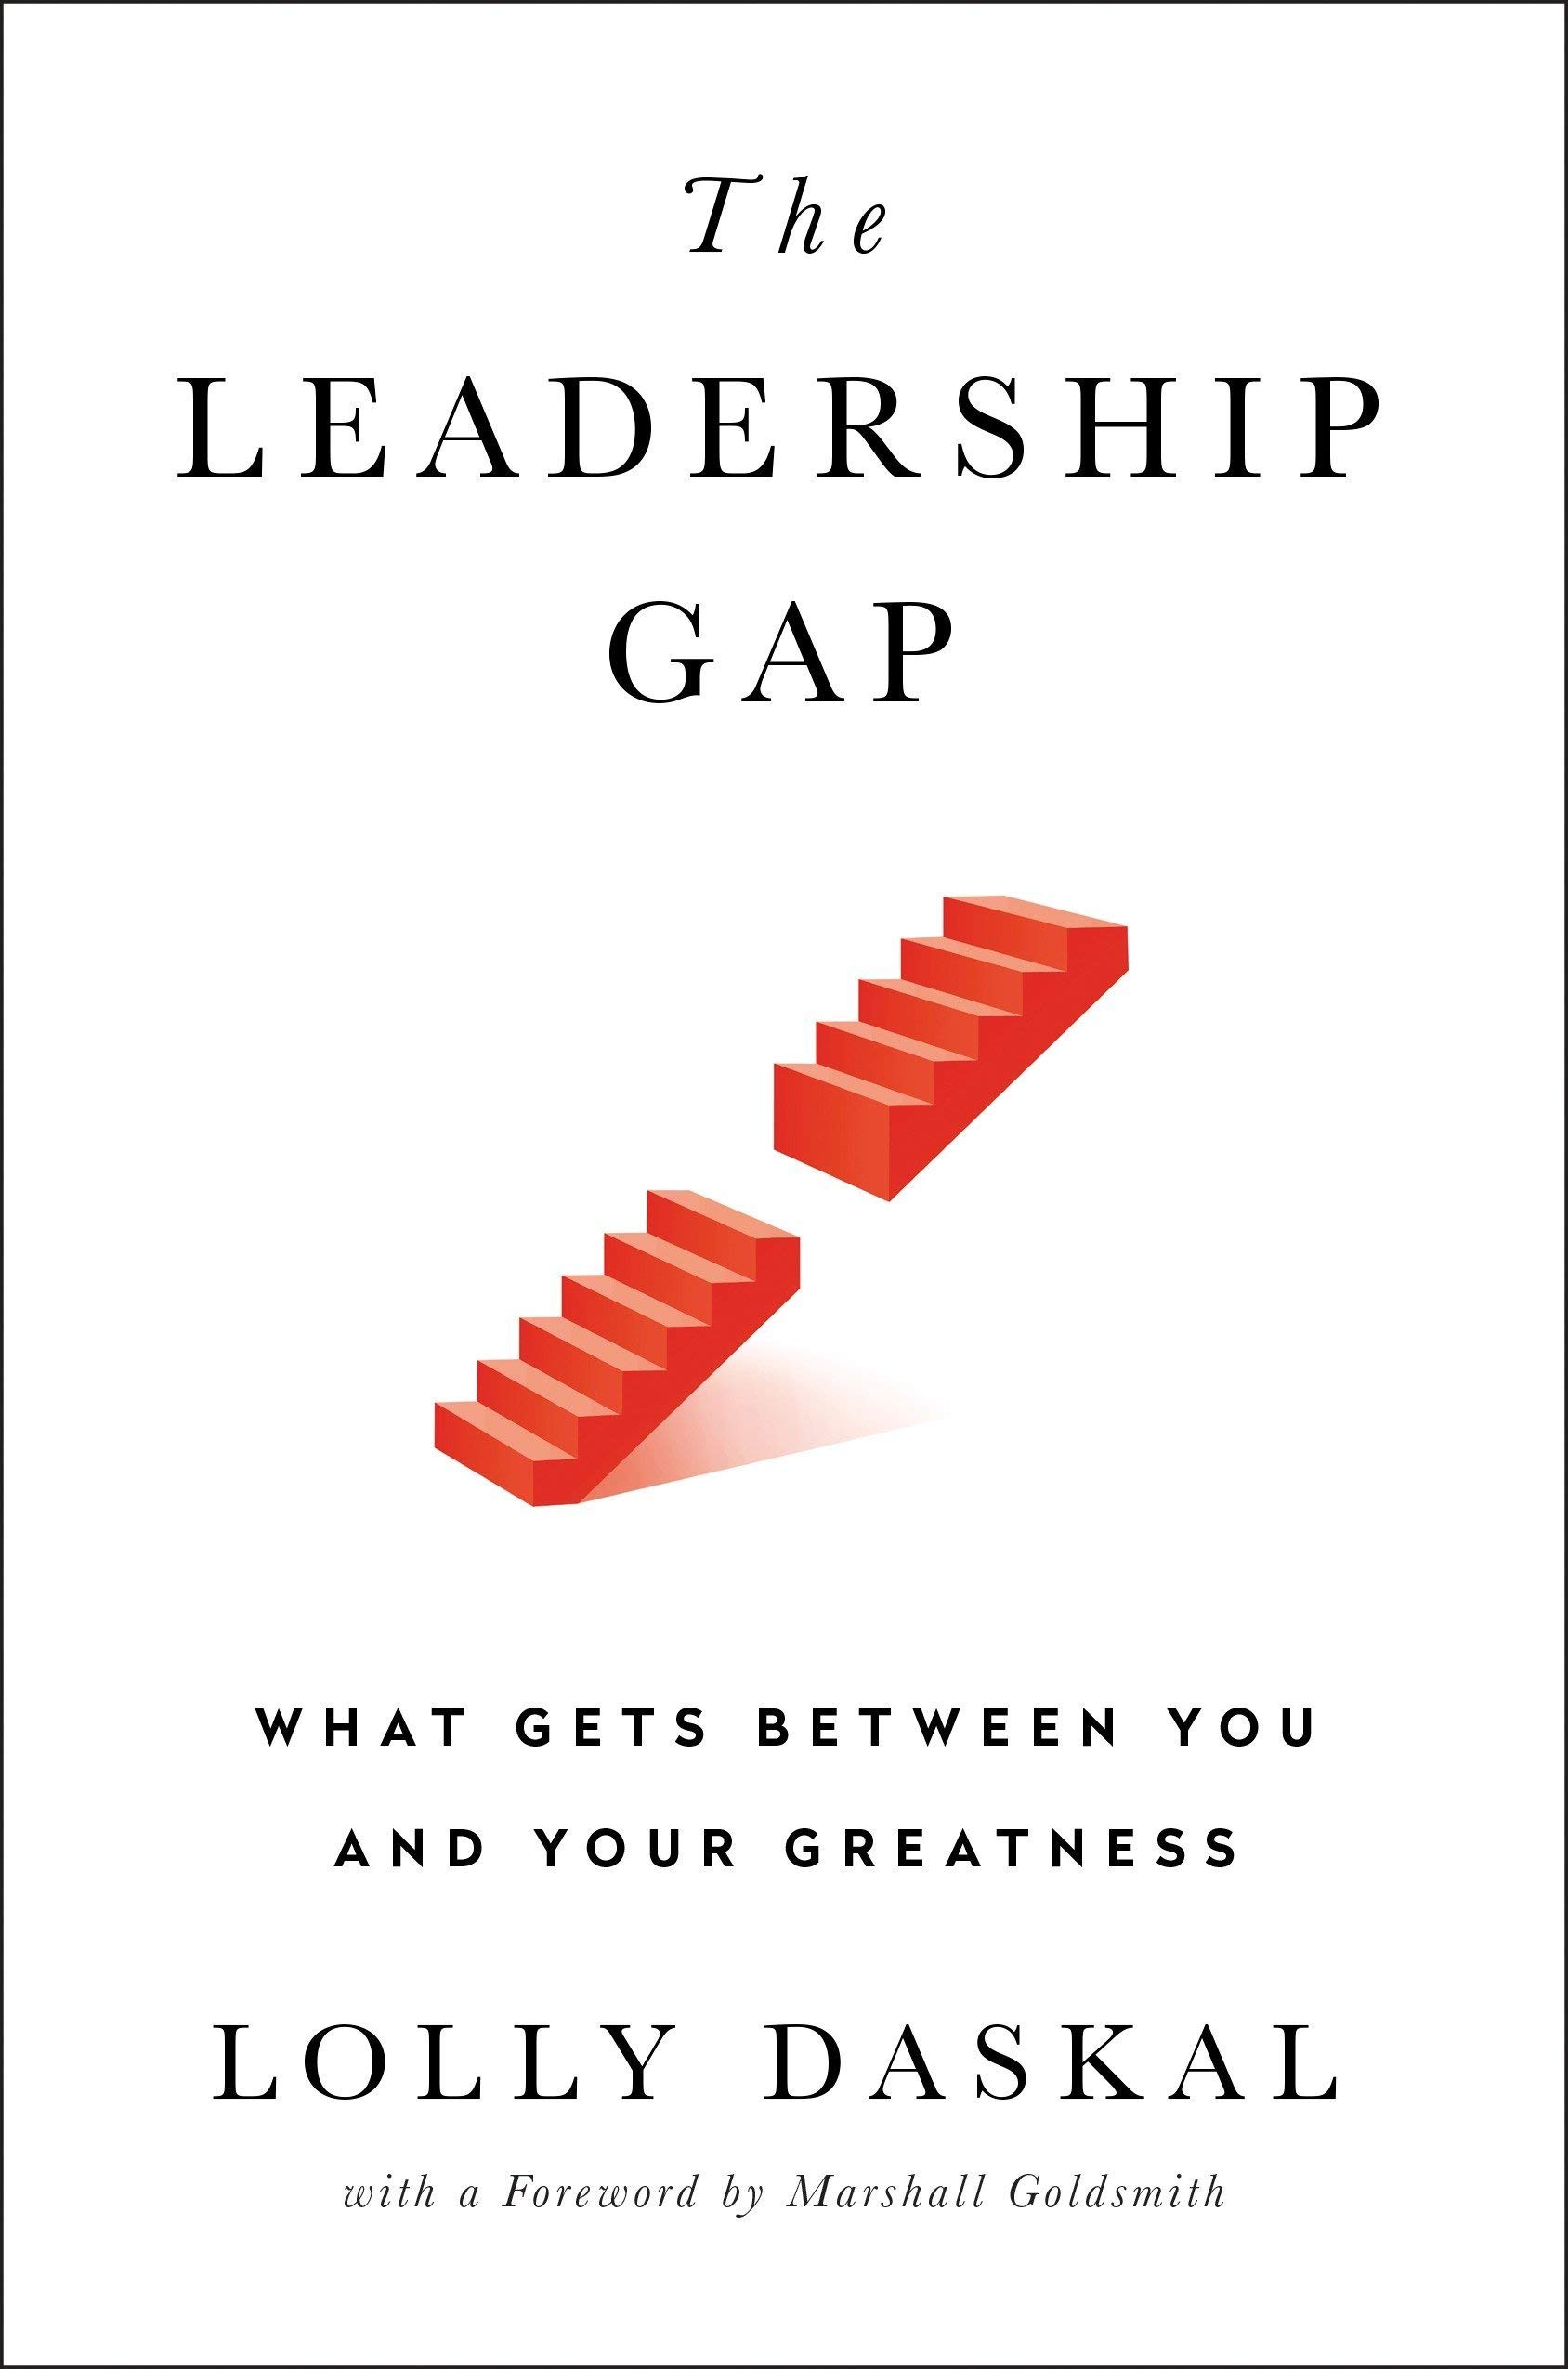 Dare to Lead By Brené Brown, The Leadership Gap [Hardcover] By Lolly Daskal 2 Books Collection Set